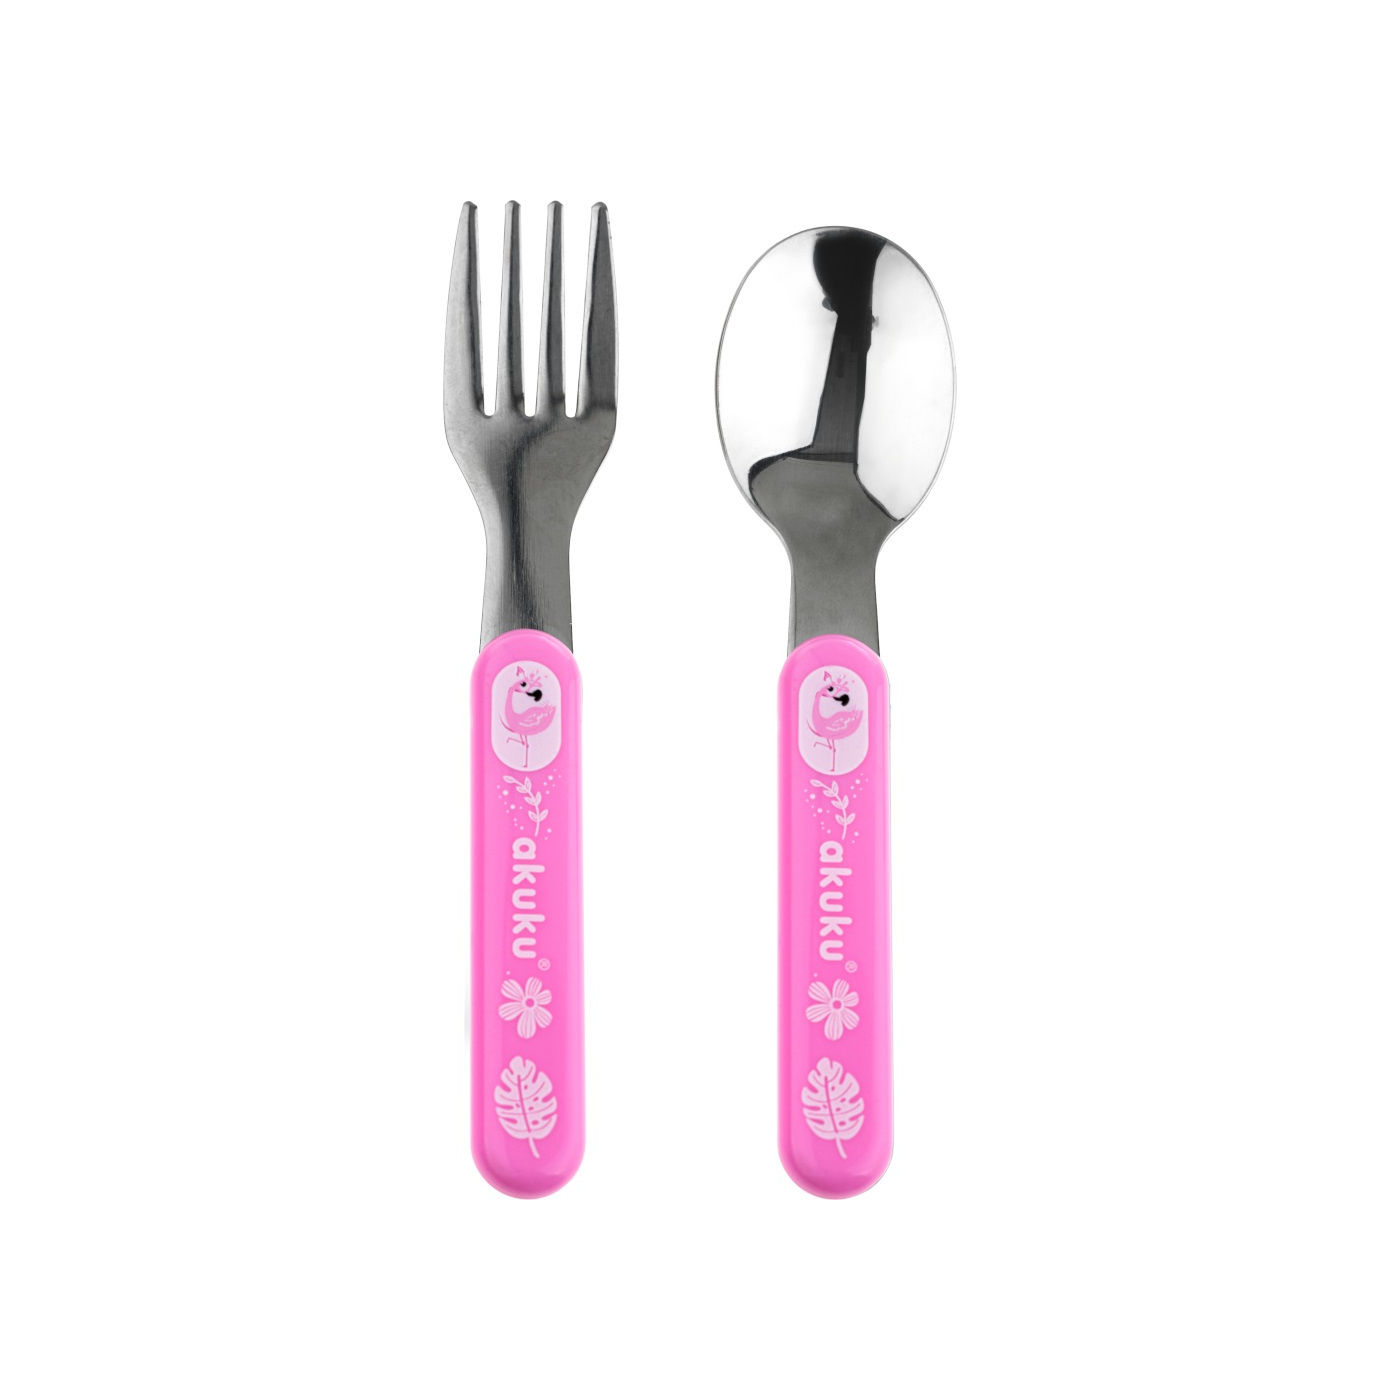 Stainless steel spoon and fork A0101